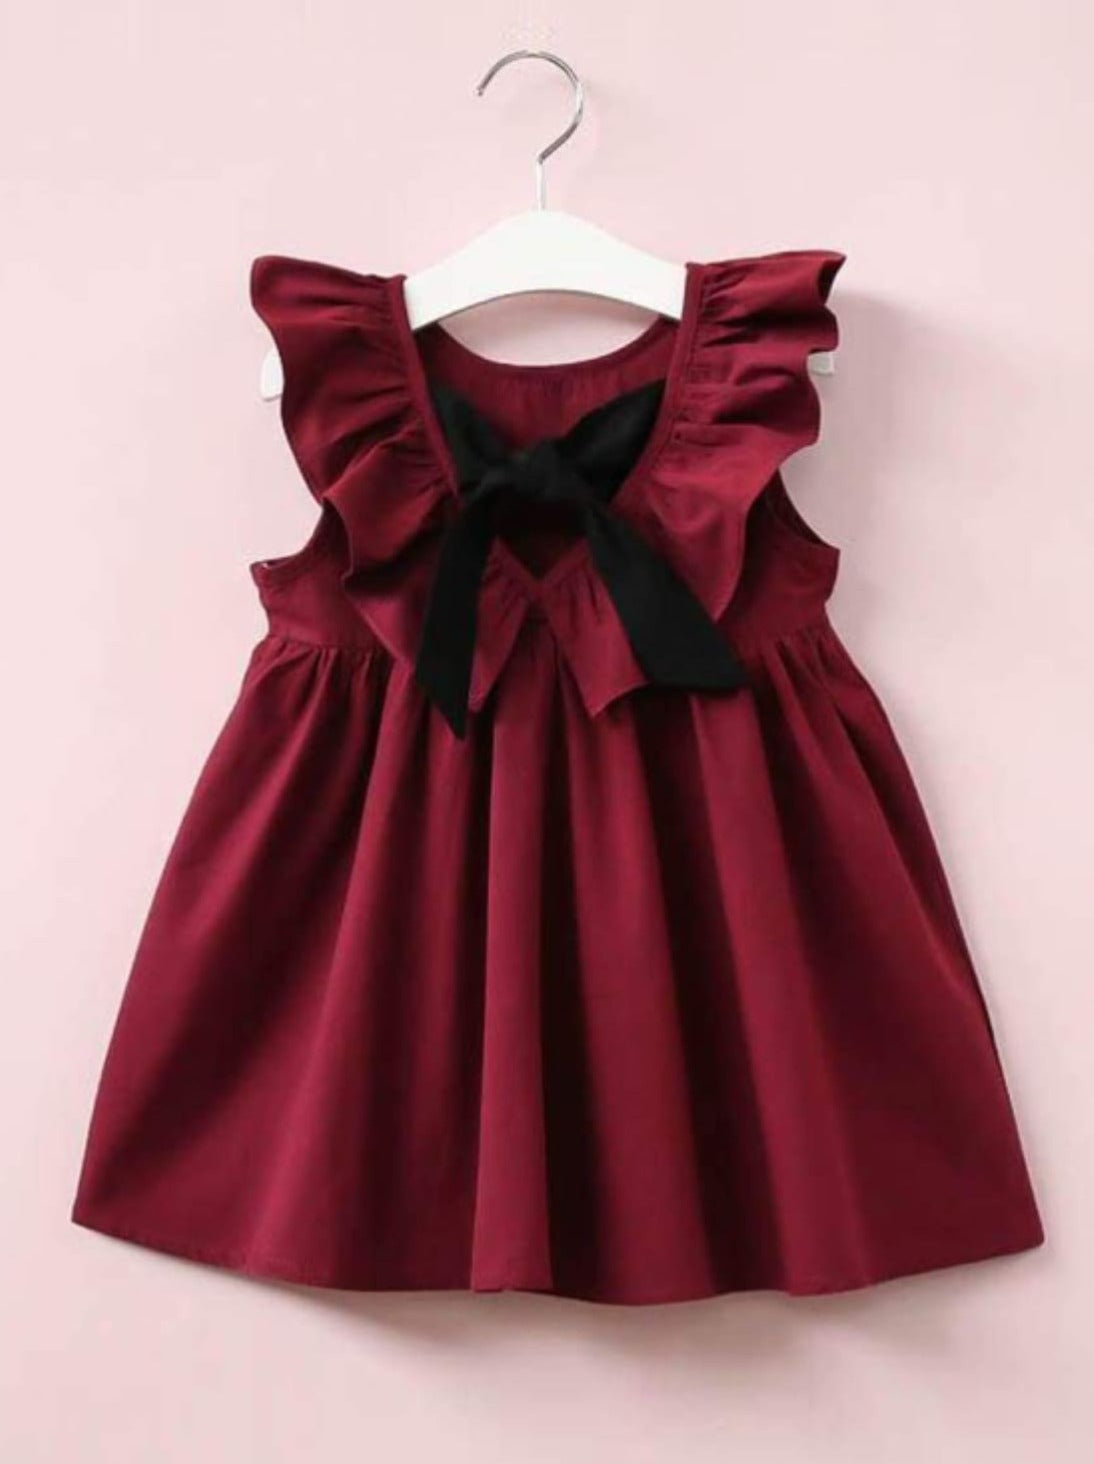 Girls Casual Ruffled Flutter Sleeve Dress with a Bow - Girls Spring Casual Dress